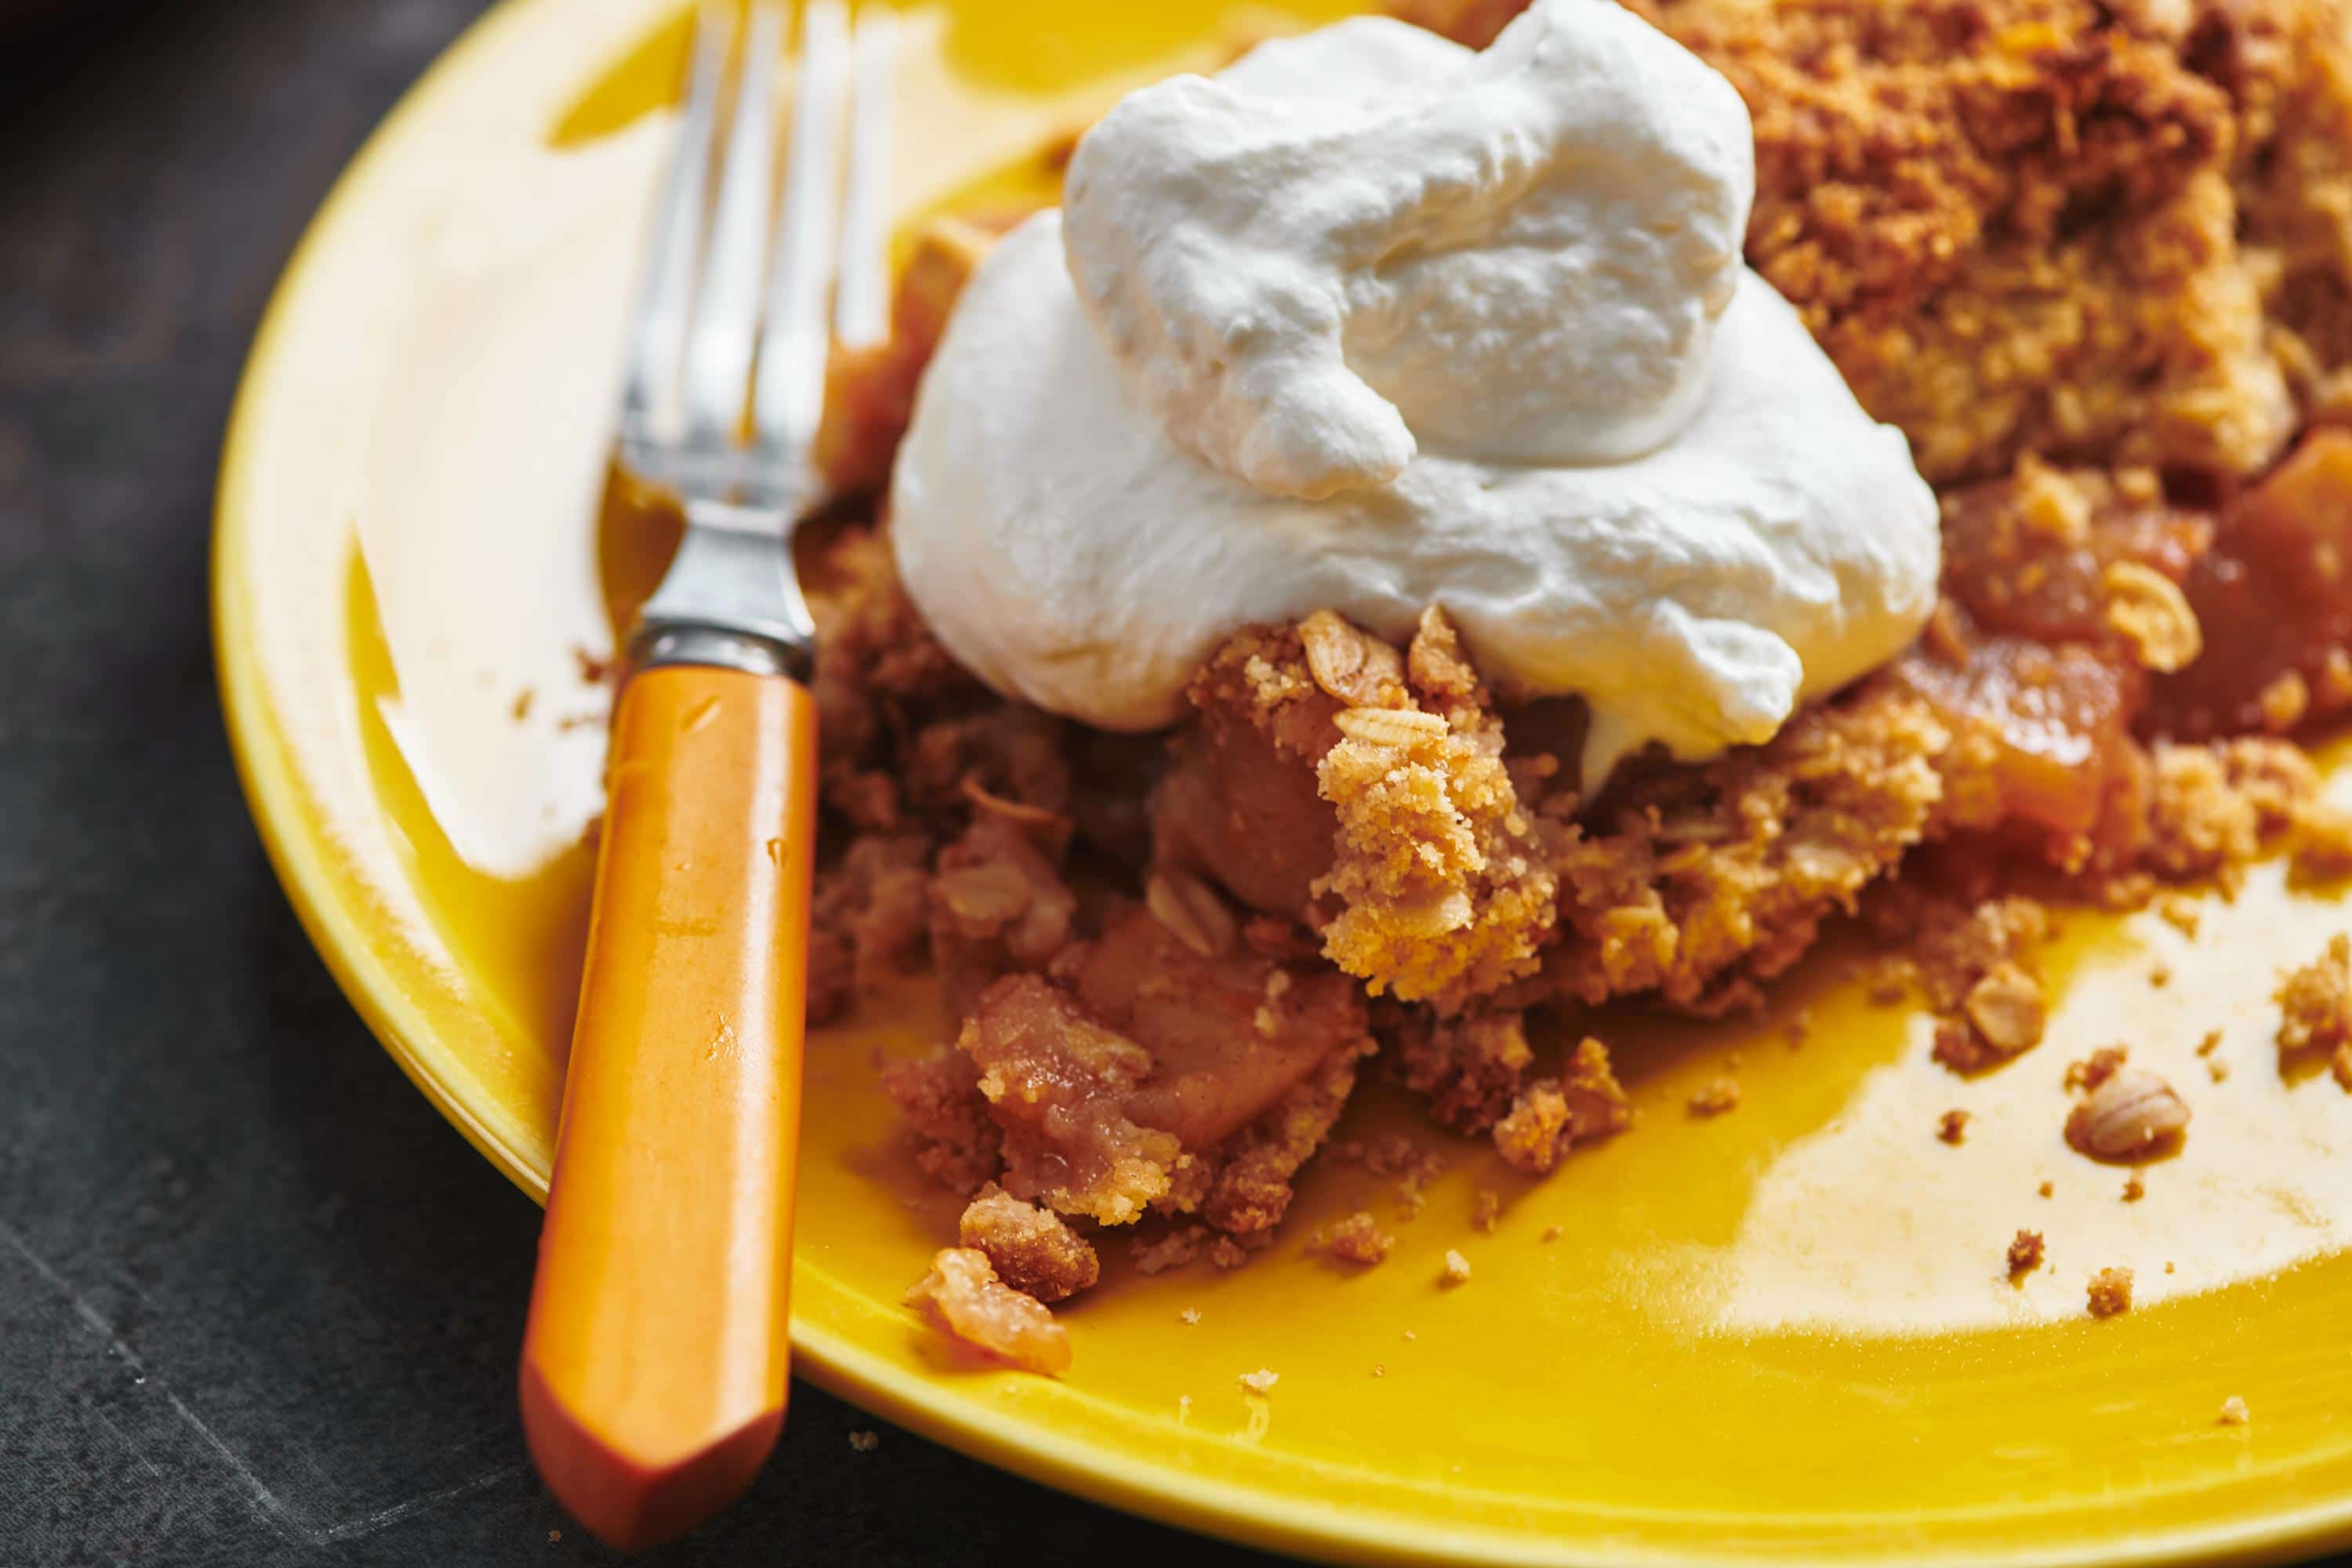 Apple crisp topped with whipped cream on yellow plate with fork.